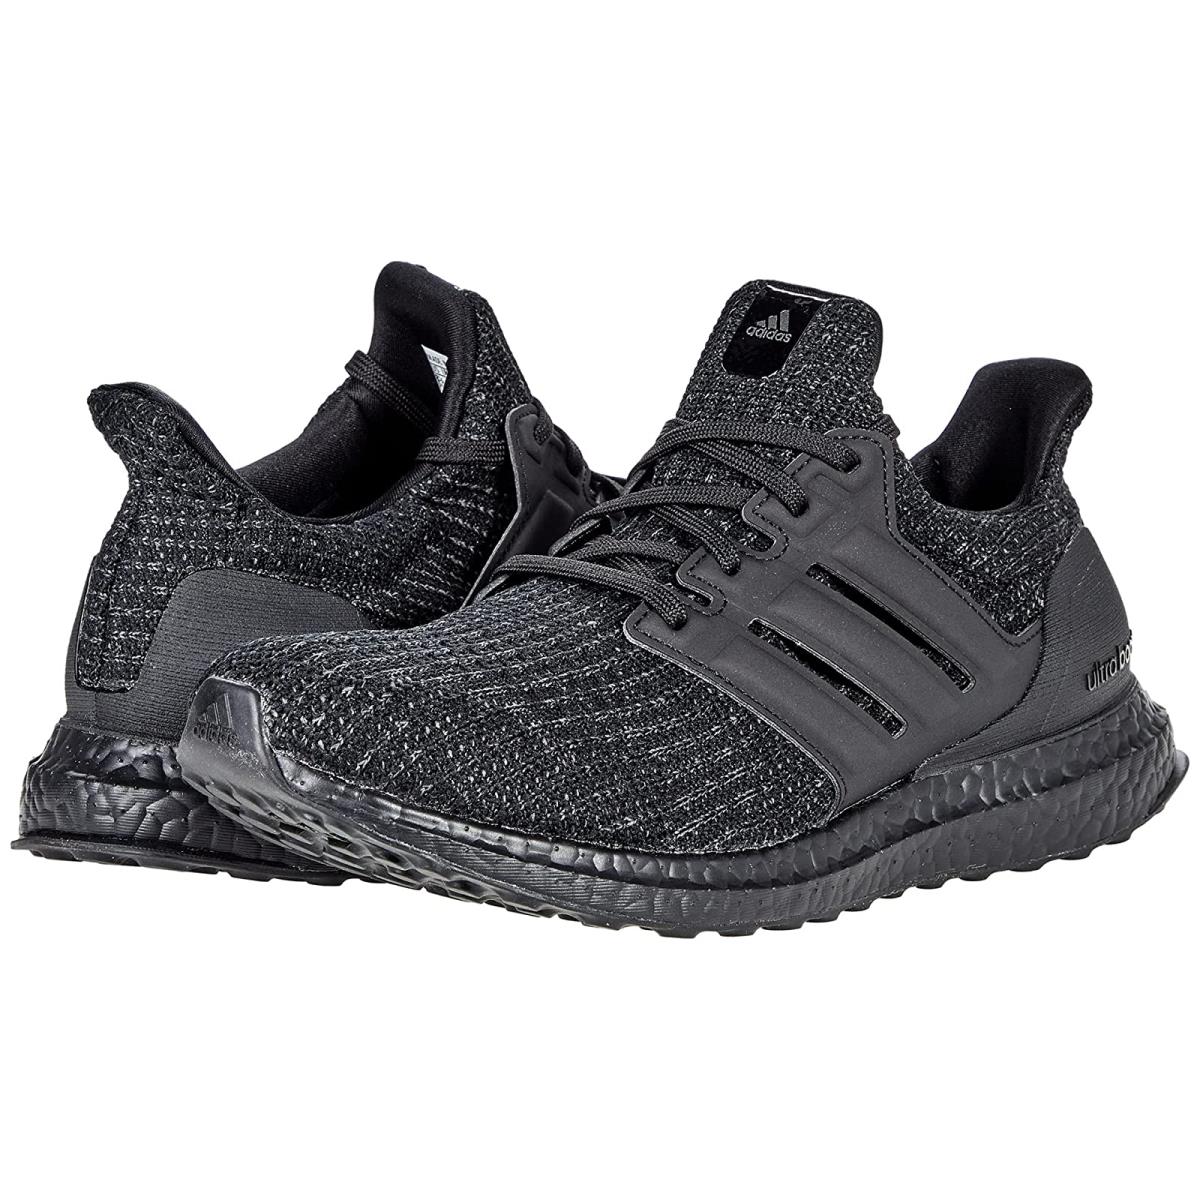 Man`s Sneakers Athletic Shoes Adidas Running Ultraboost 4.0 Dna Black/Black/Grey